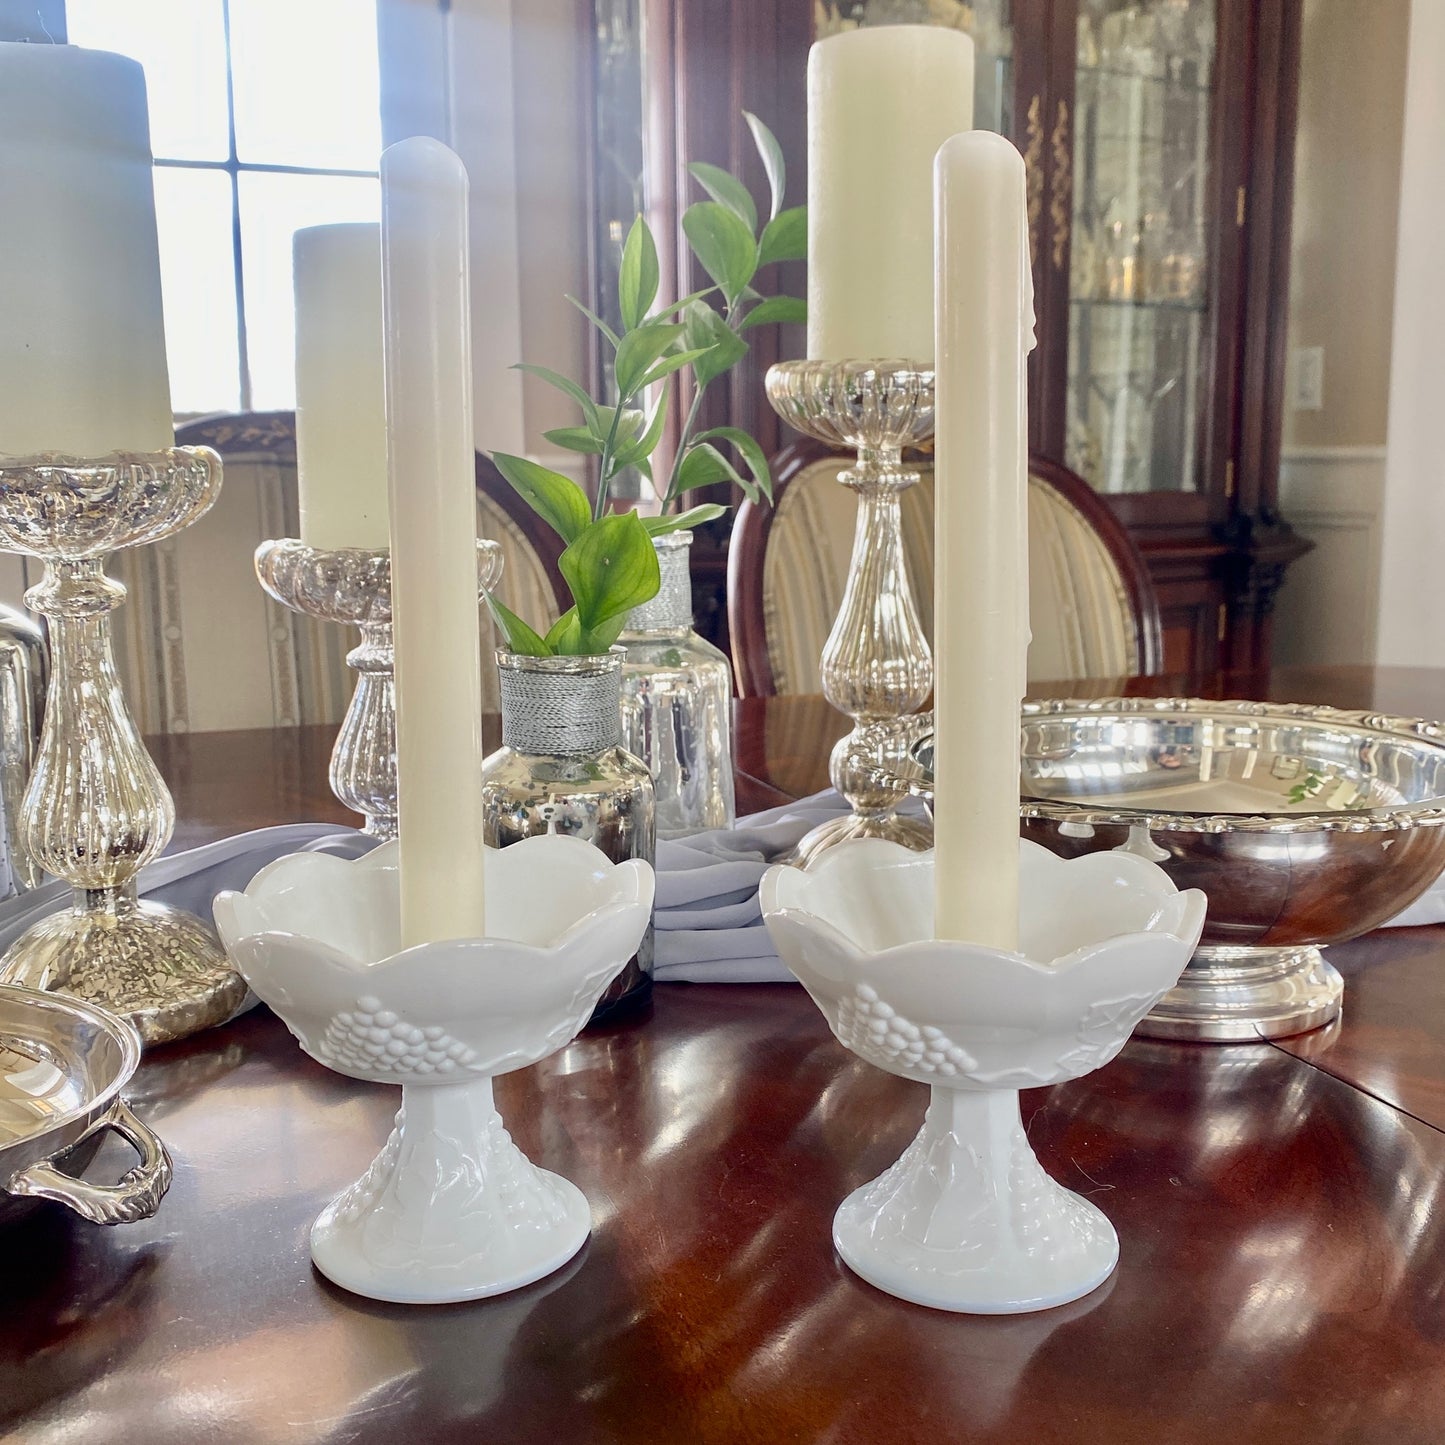 Pair of Milk Glass Candlestick Holders/Candy Dishes